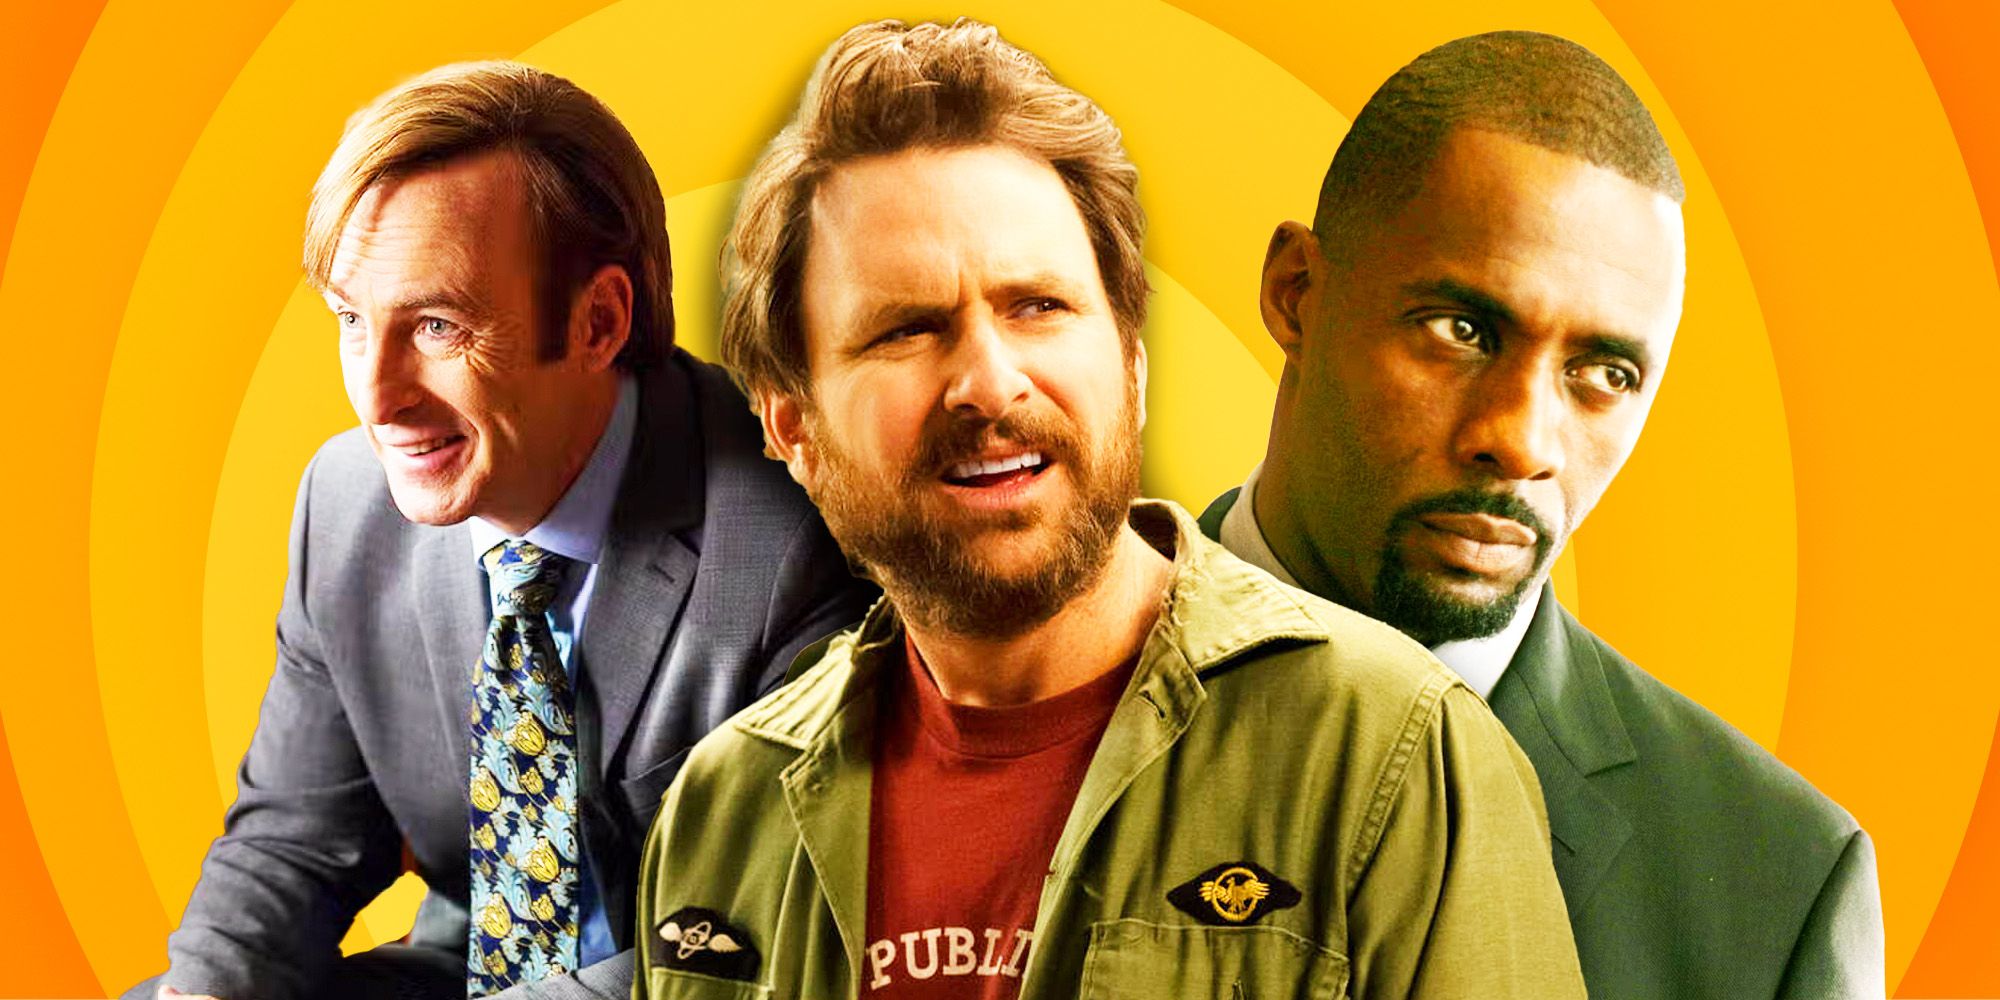 Saul Goodman from Better Call Saul, Charlie from It's Always Sunny, Stringer Bell from The Wire